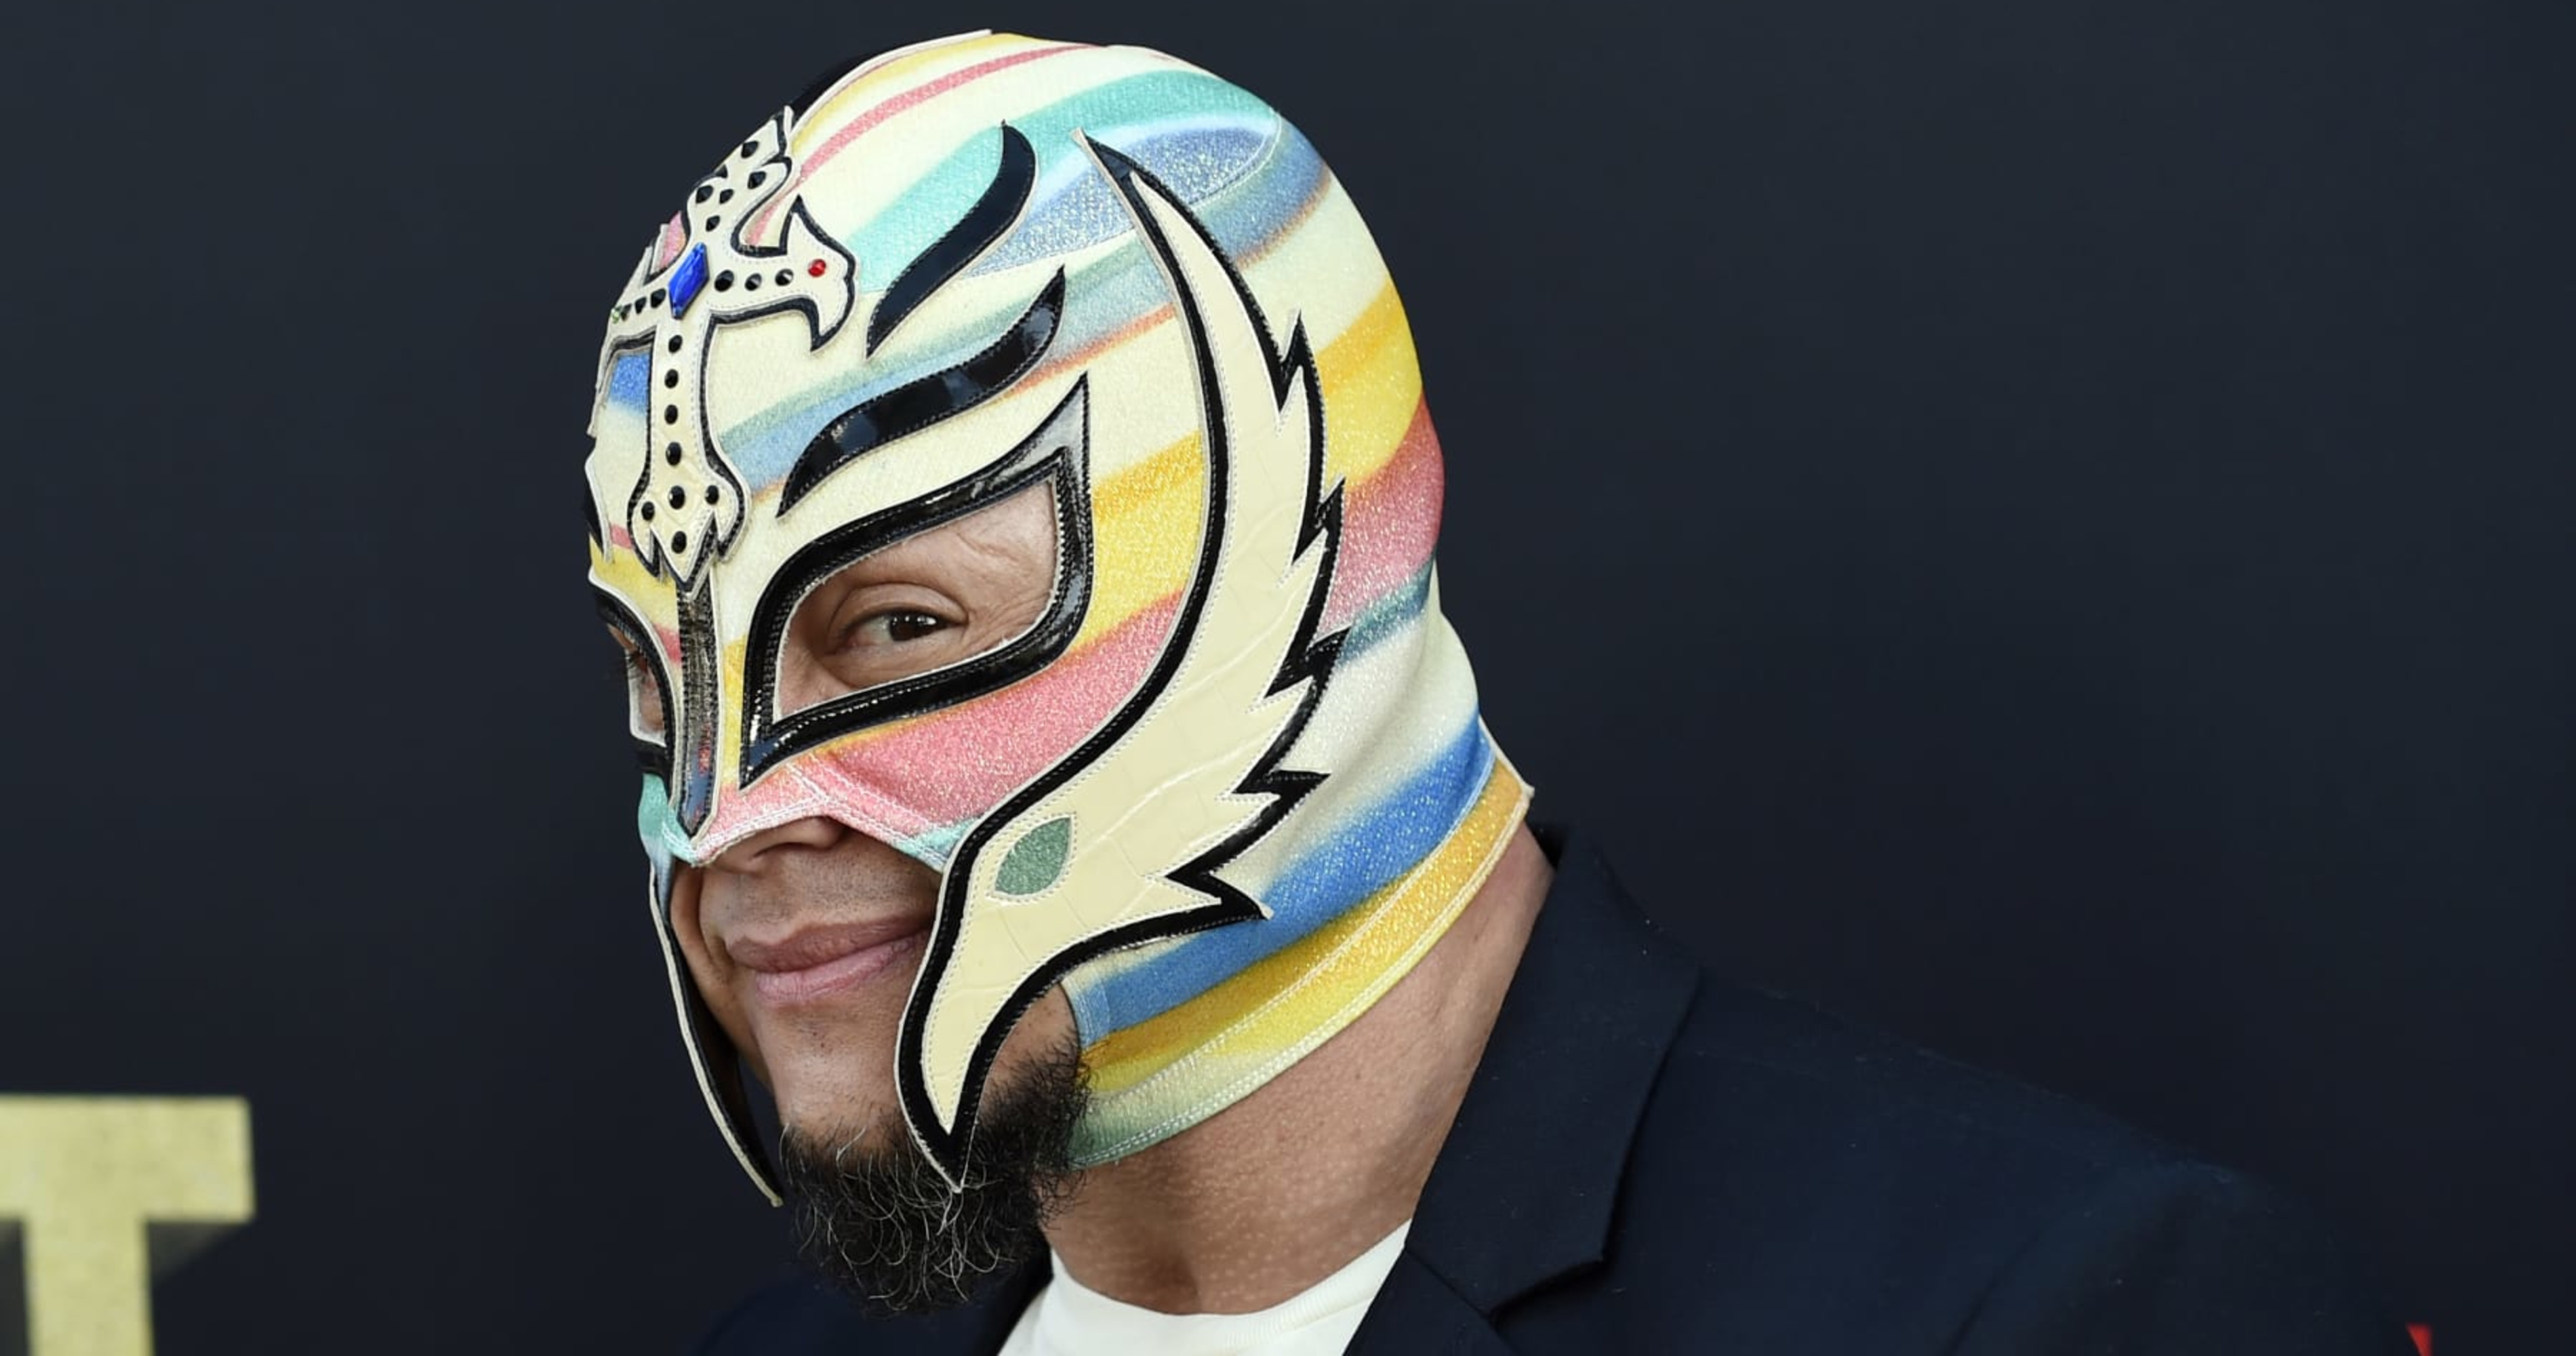 WWE Hall of Fame 2023 Top Highlights from Rey Mysterio, Great Muta and